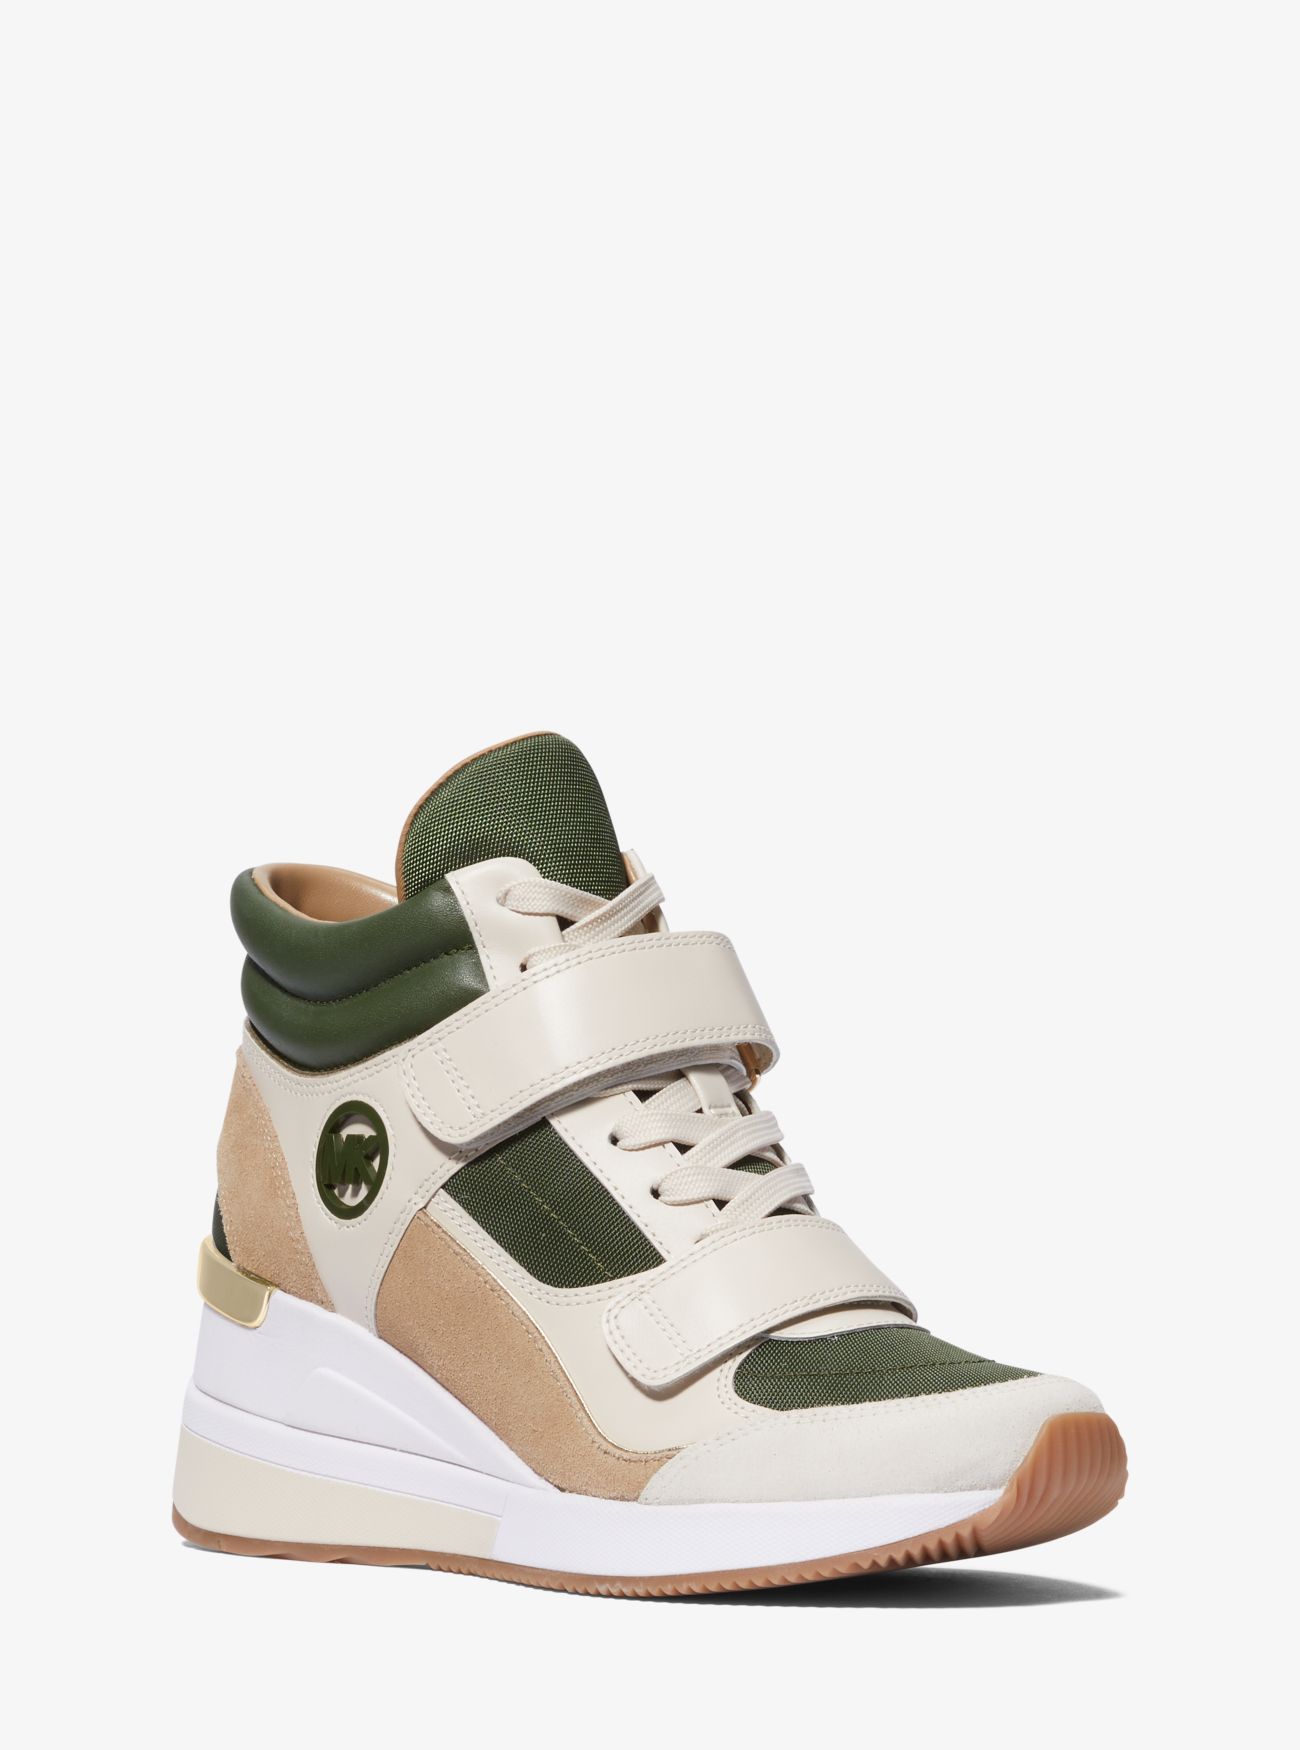 MK Gentry Leather and Canvas High-Top Wedge Trainer - Green - Michael Kors